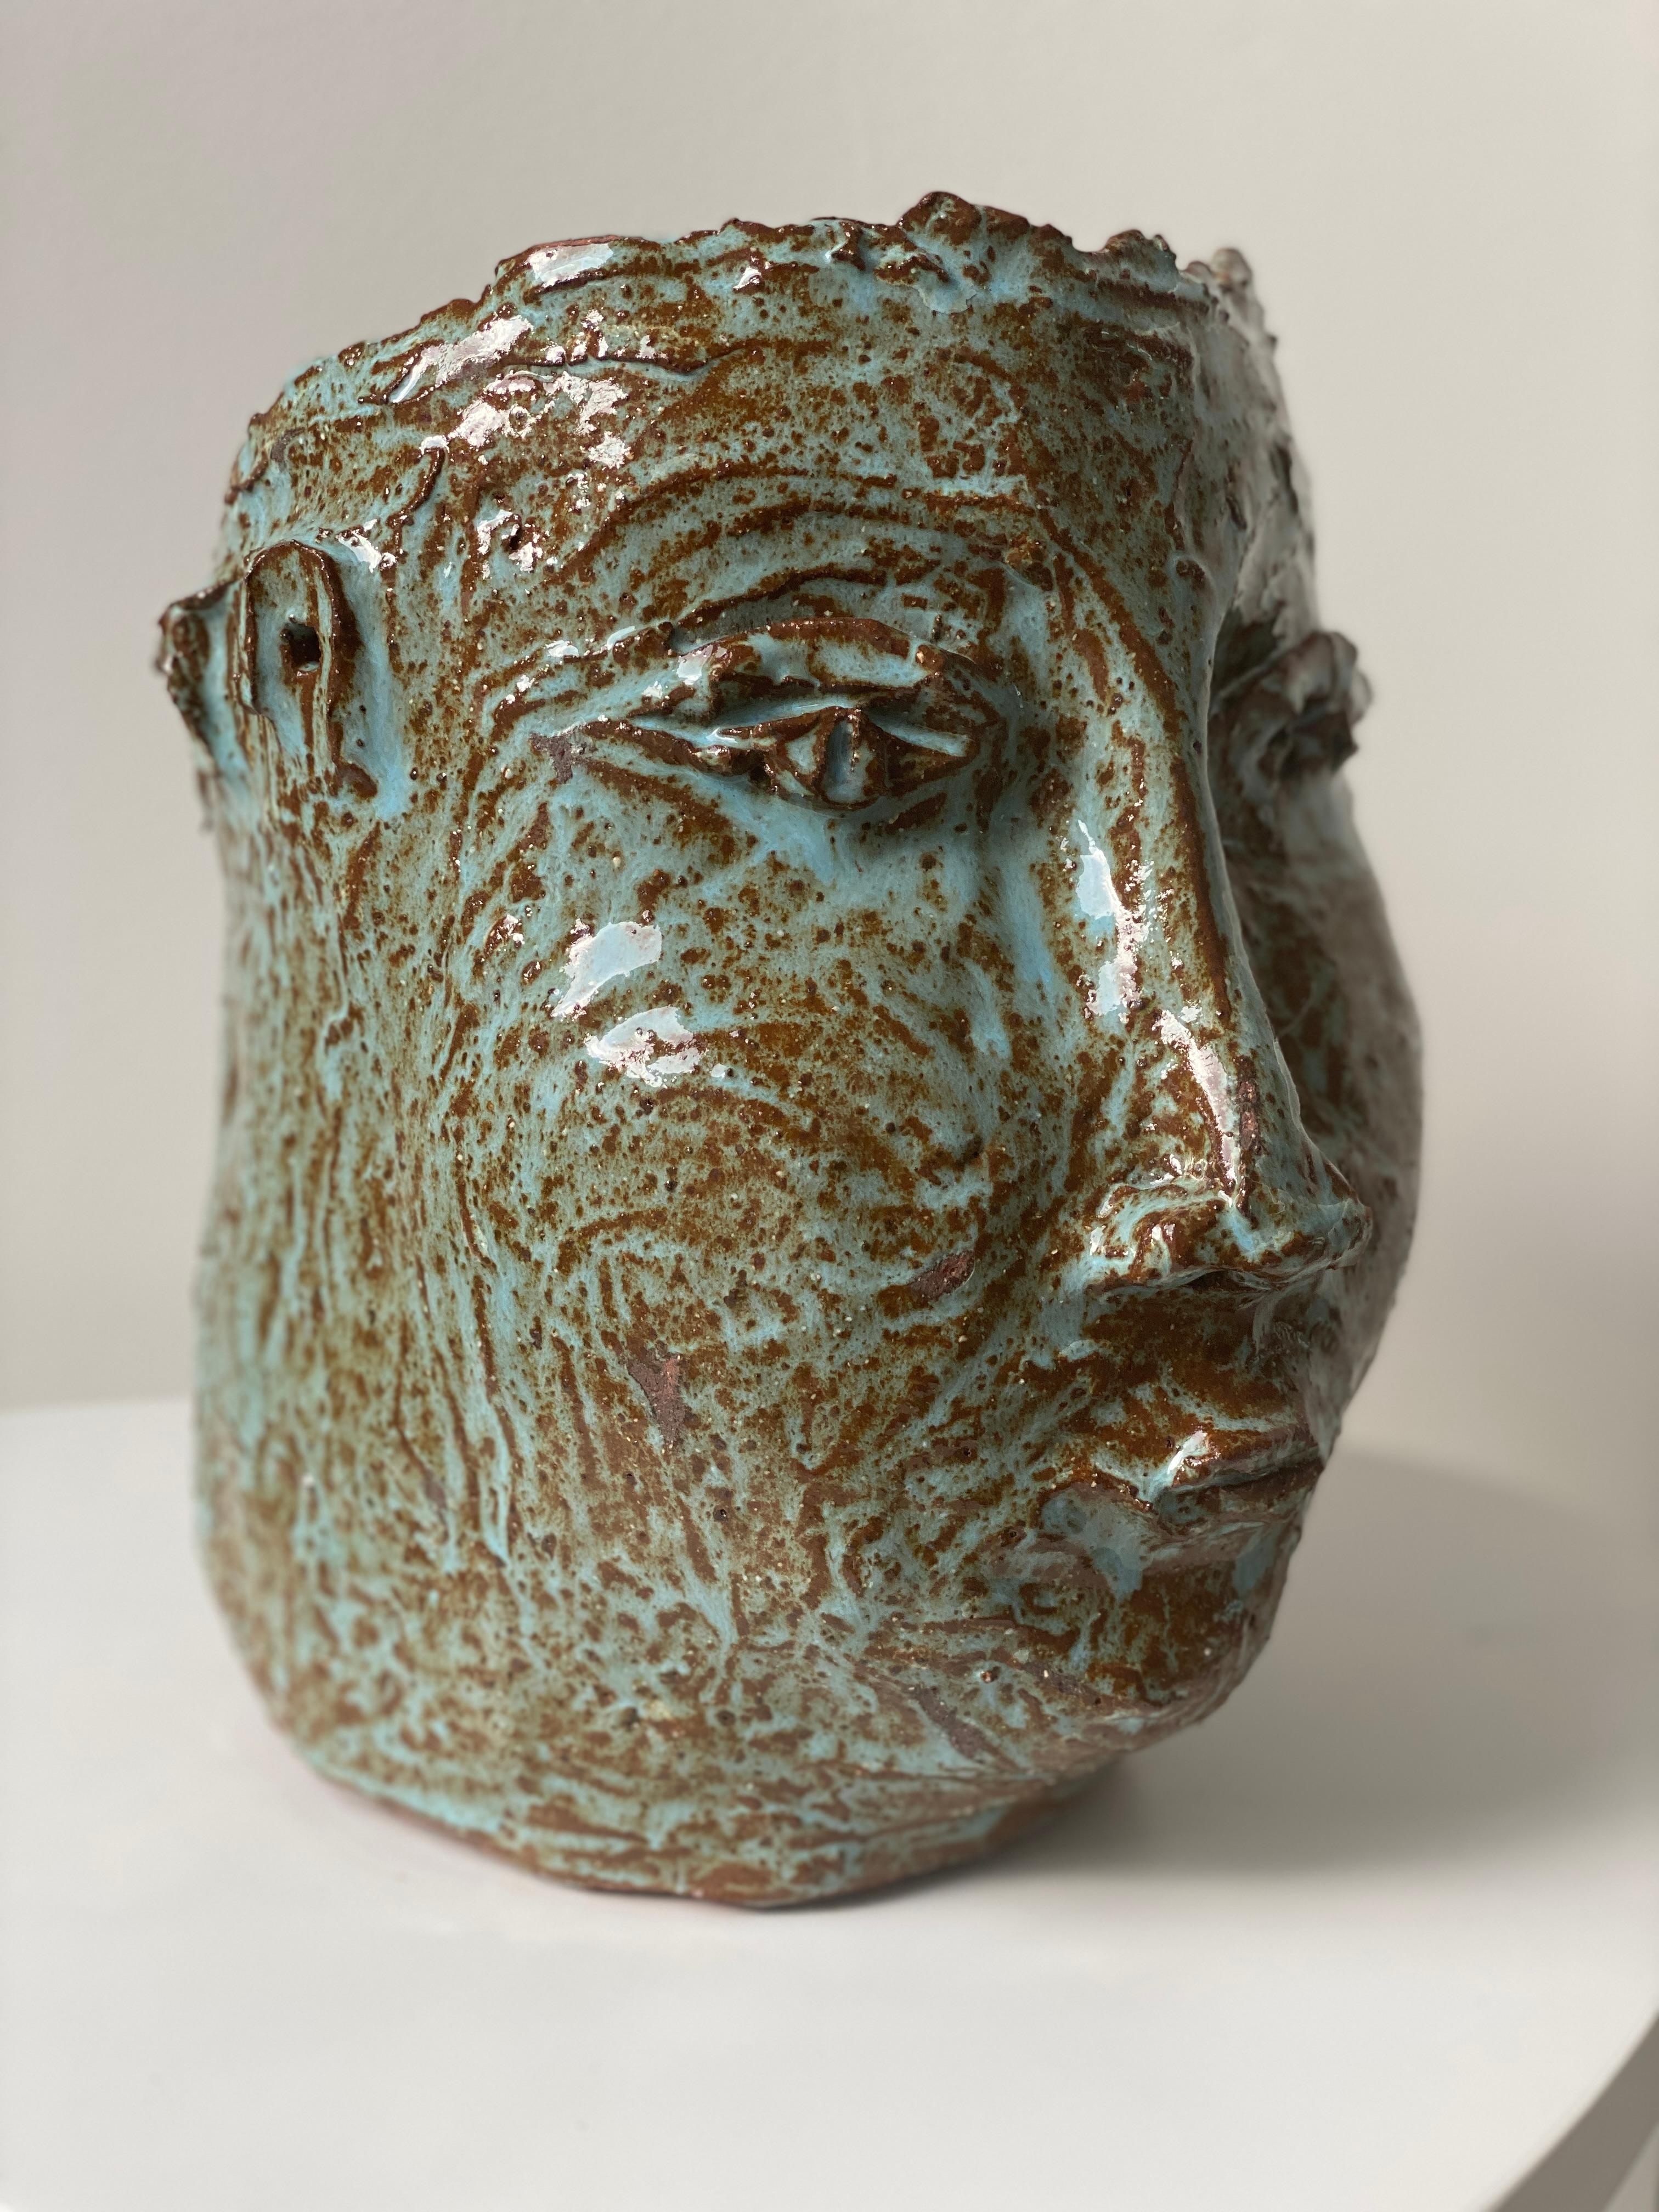 Turquoise sienna rustic wabi sabi hand sculpted glazed clay face vessel ancient  - Sculpture by Kathleen Rhee